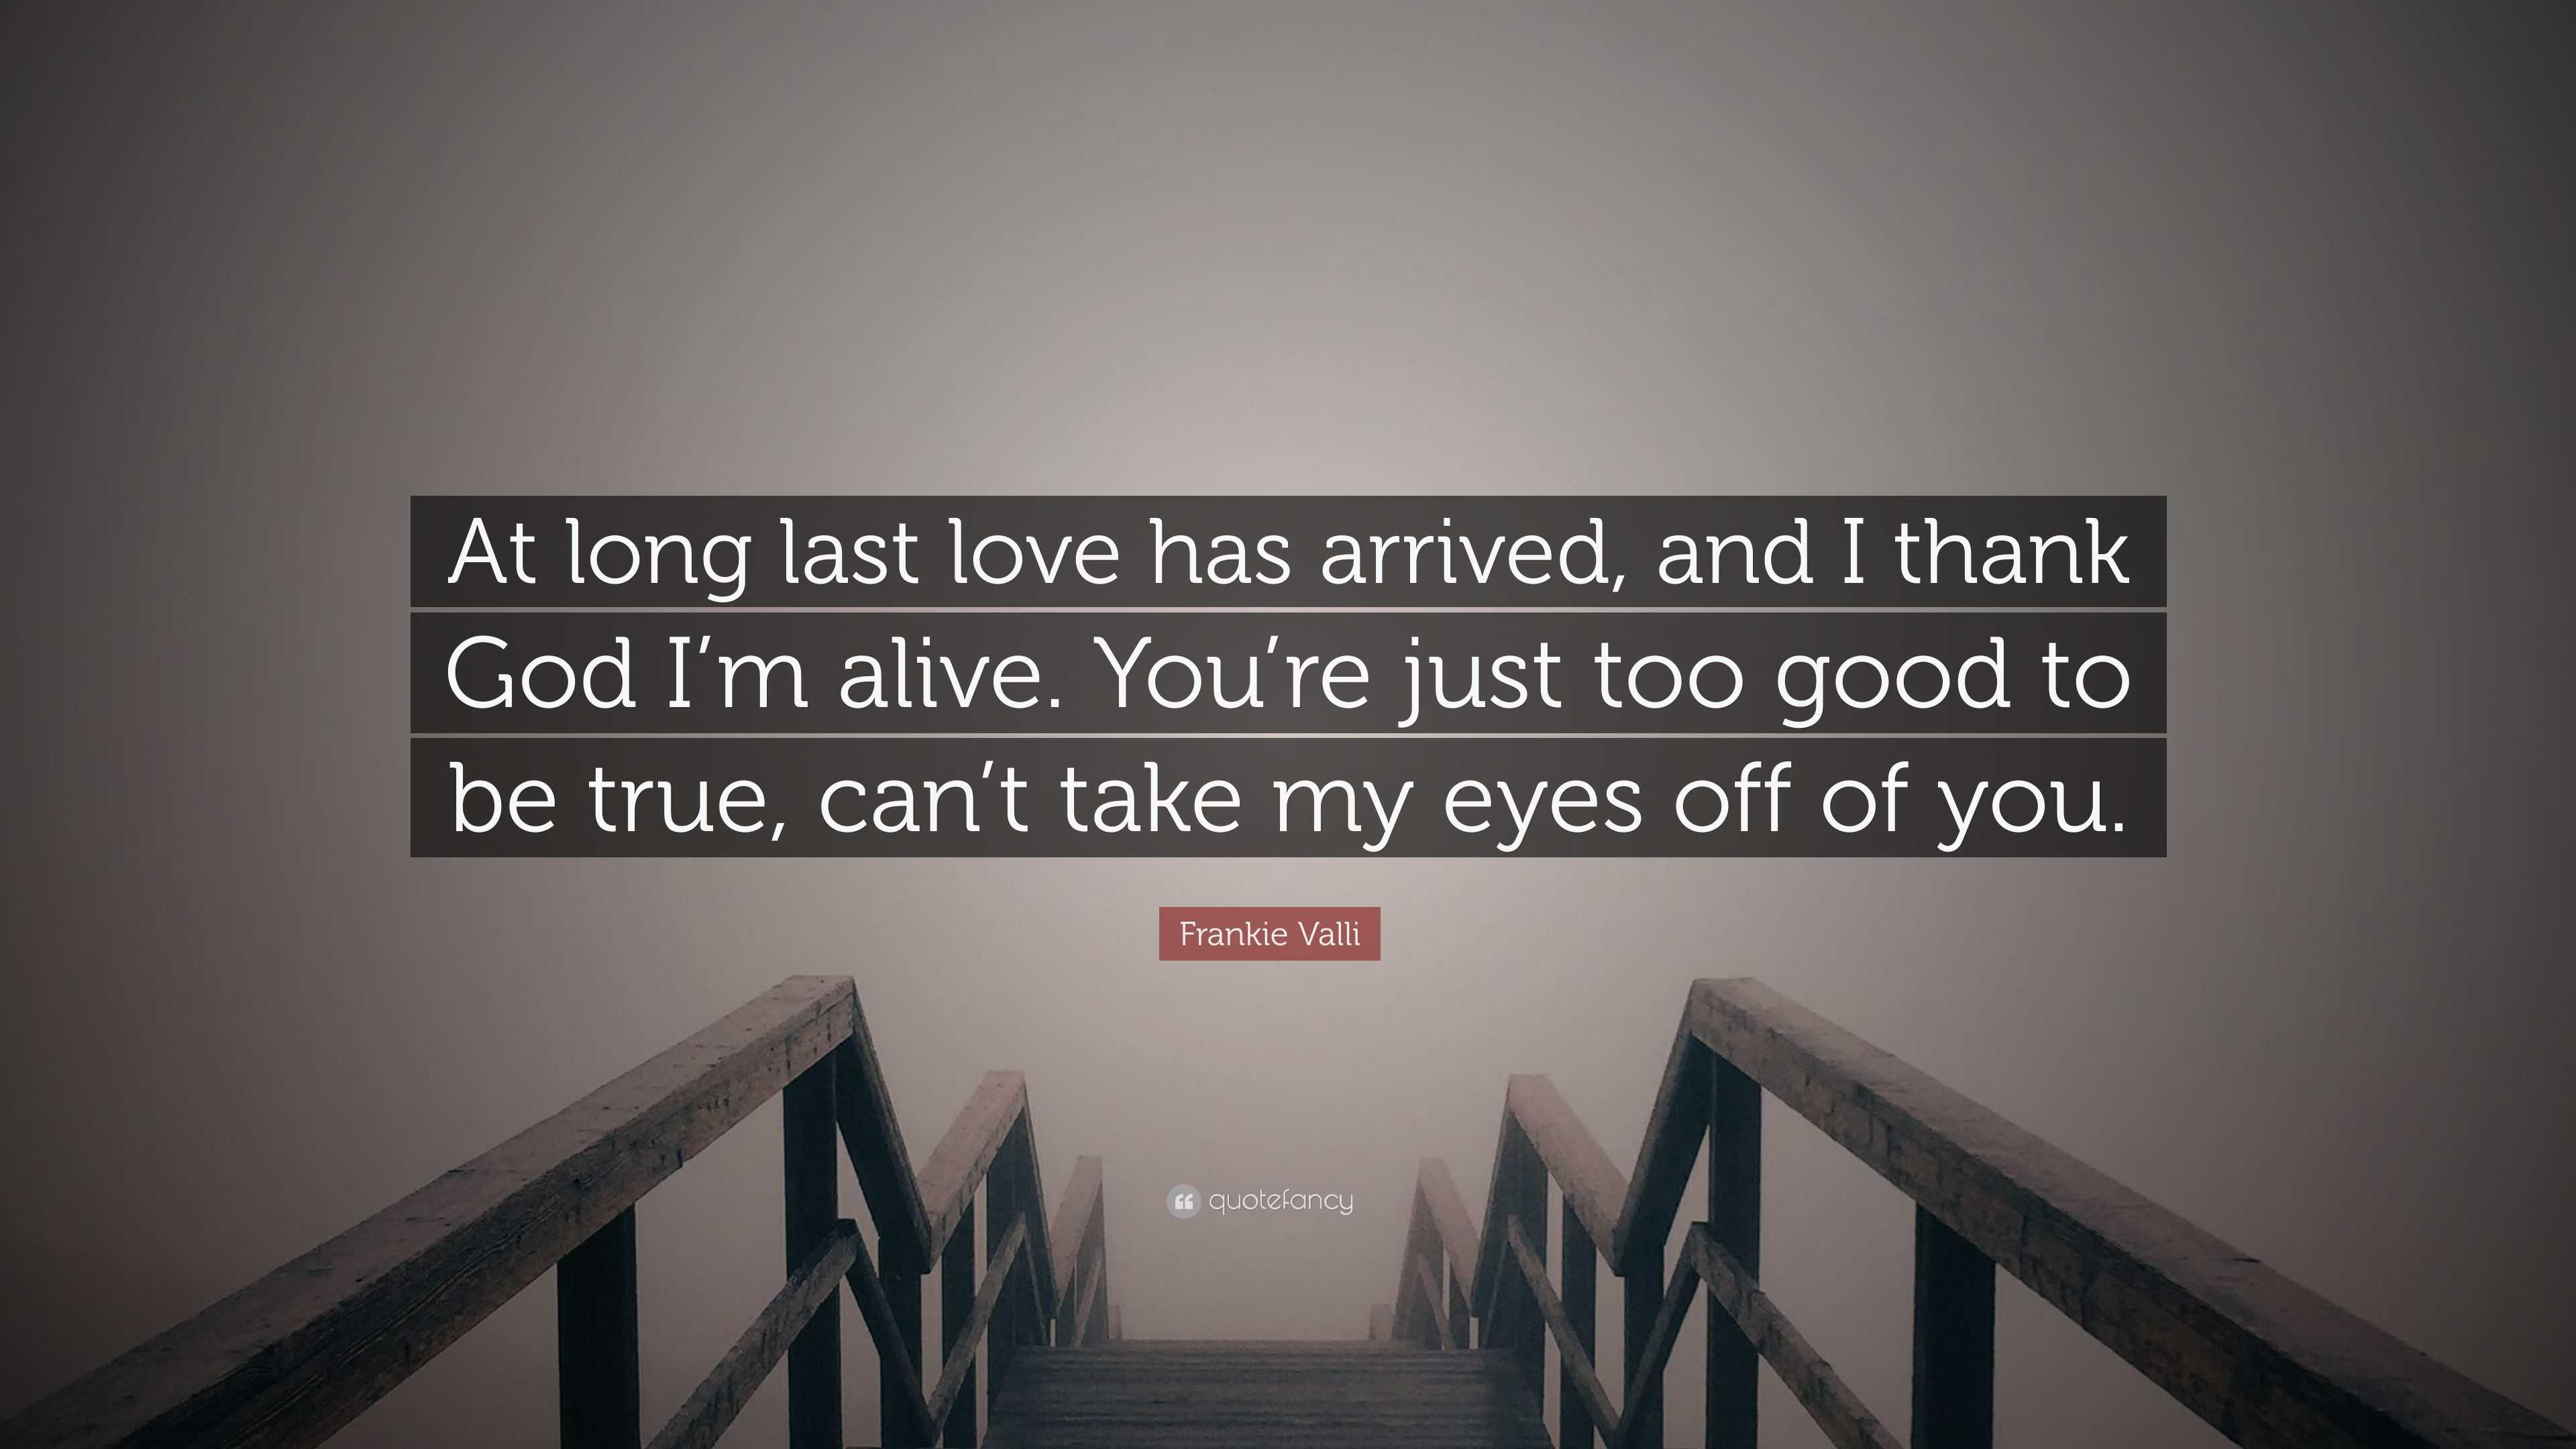 Frankie Valli Quote At Long Last Love Has Arrived And I Thank God I M Alive You Re Just Too Good To Be True Can T Take My Eyes Off Of You 9 Wallpapers